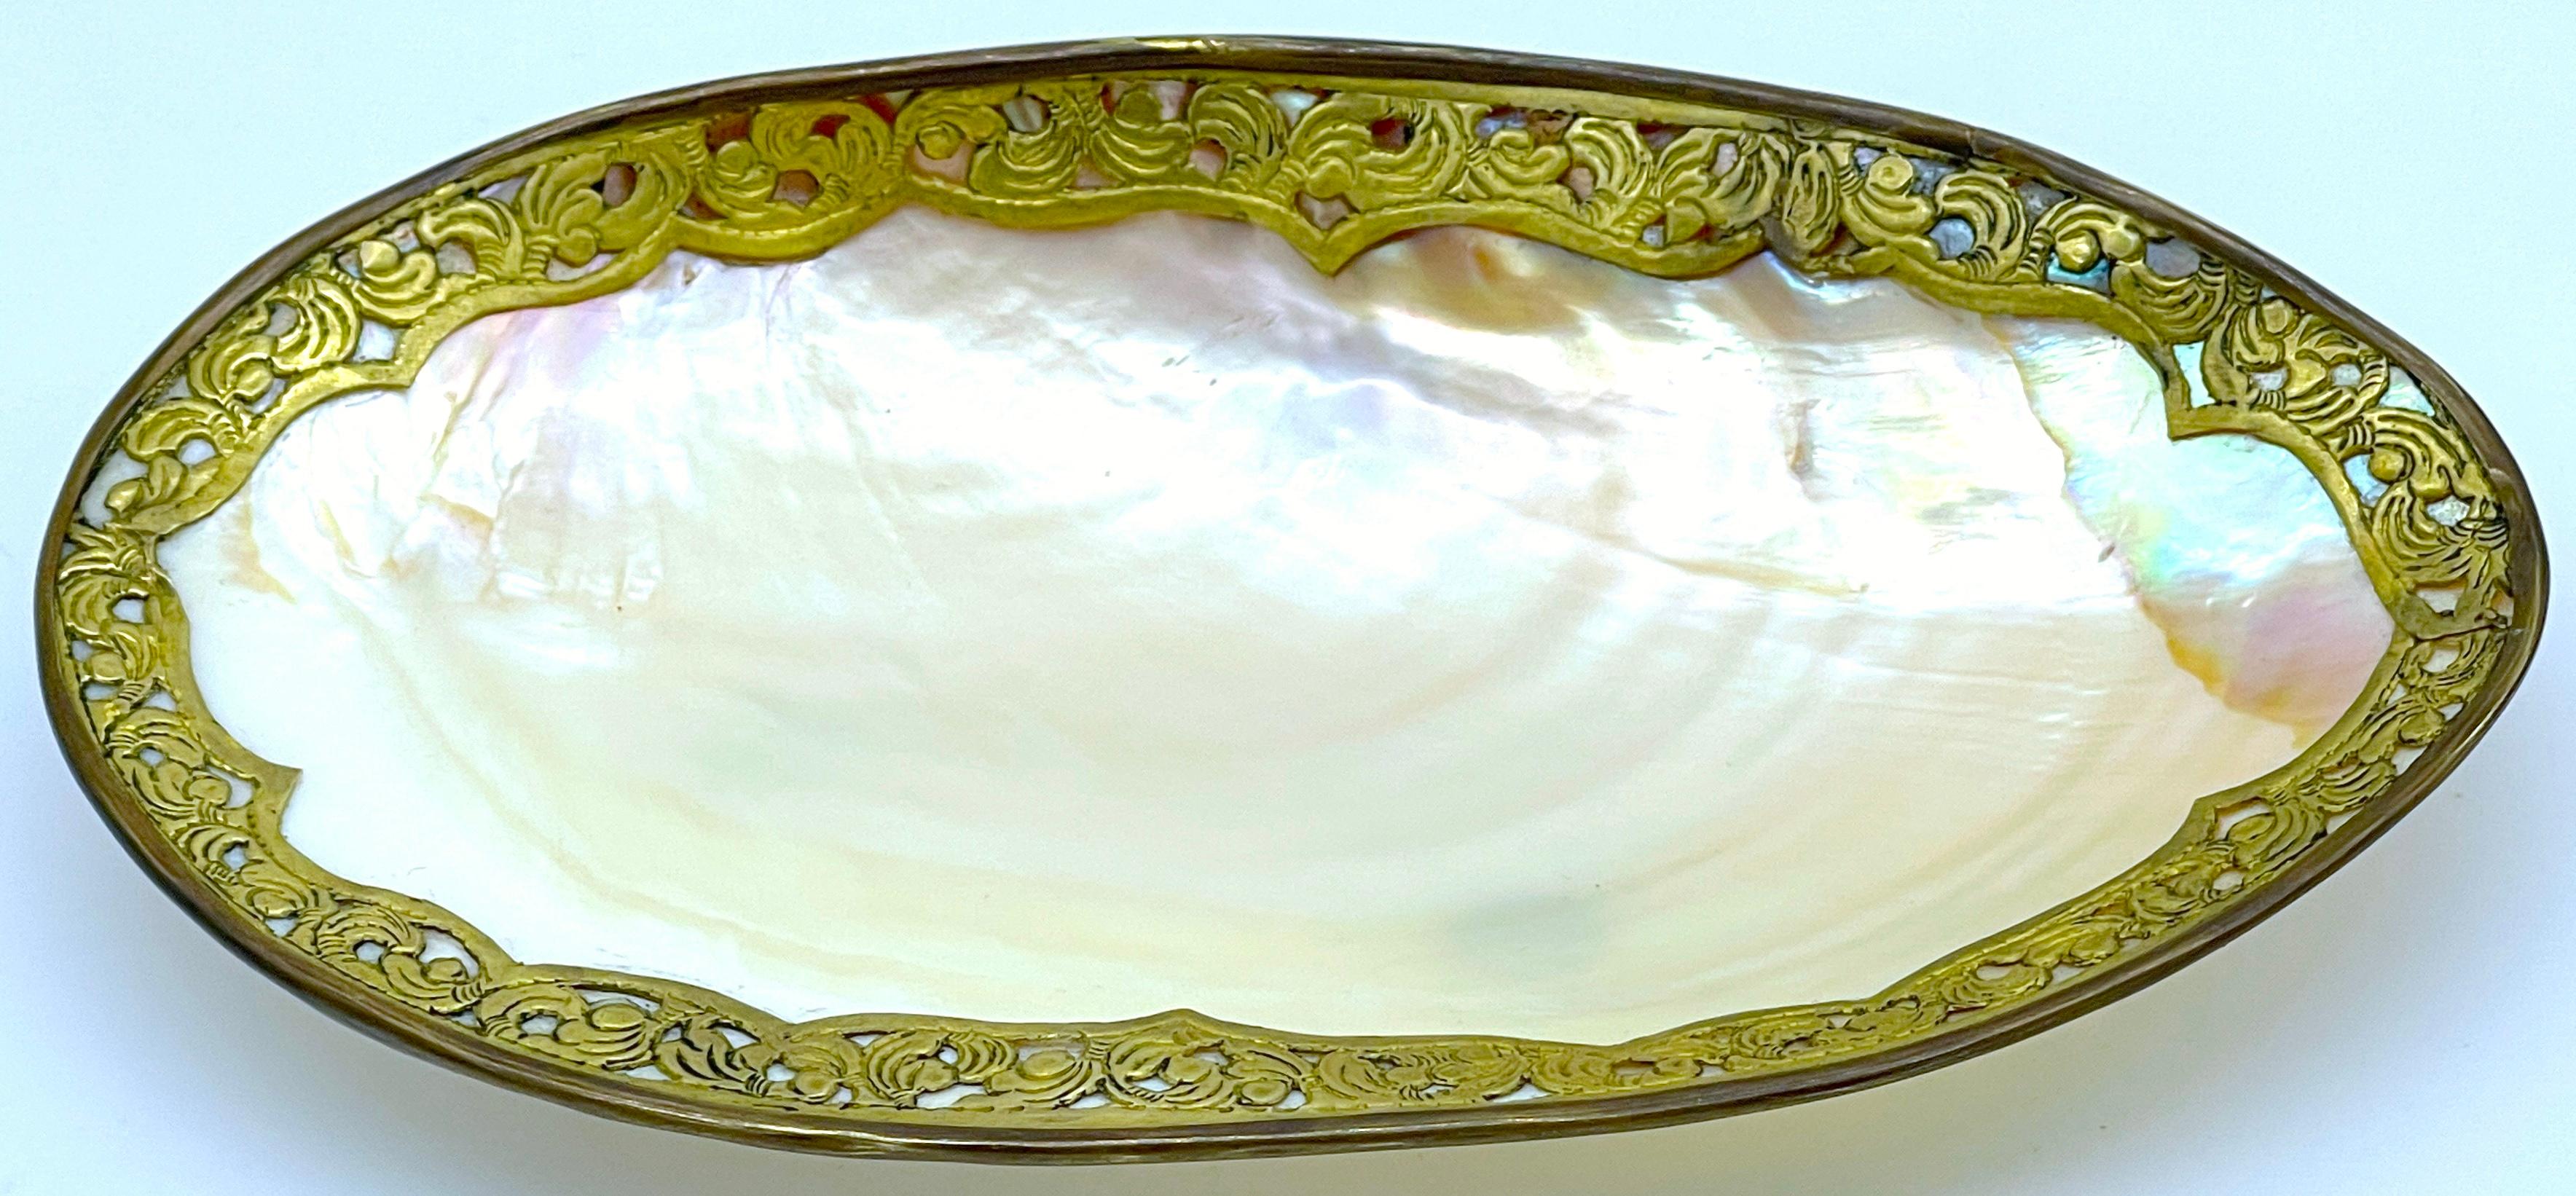 Napoleon III Ormolu Mounted Footed Shell Dish/Vide-Poche
France, circa 1870s

An exquisite Napoleon III Ormolu Mounted Footed Shell Dish/Vide-Poche from France, circa the 1870s. This captivating piece features an oval naturalistic form, measuring 10